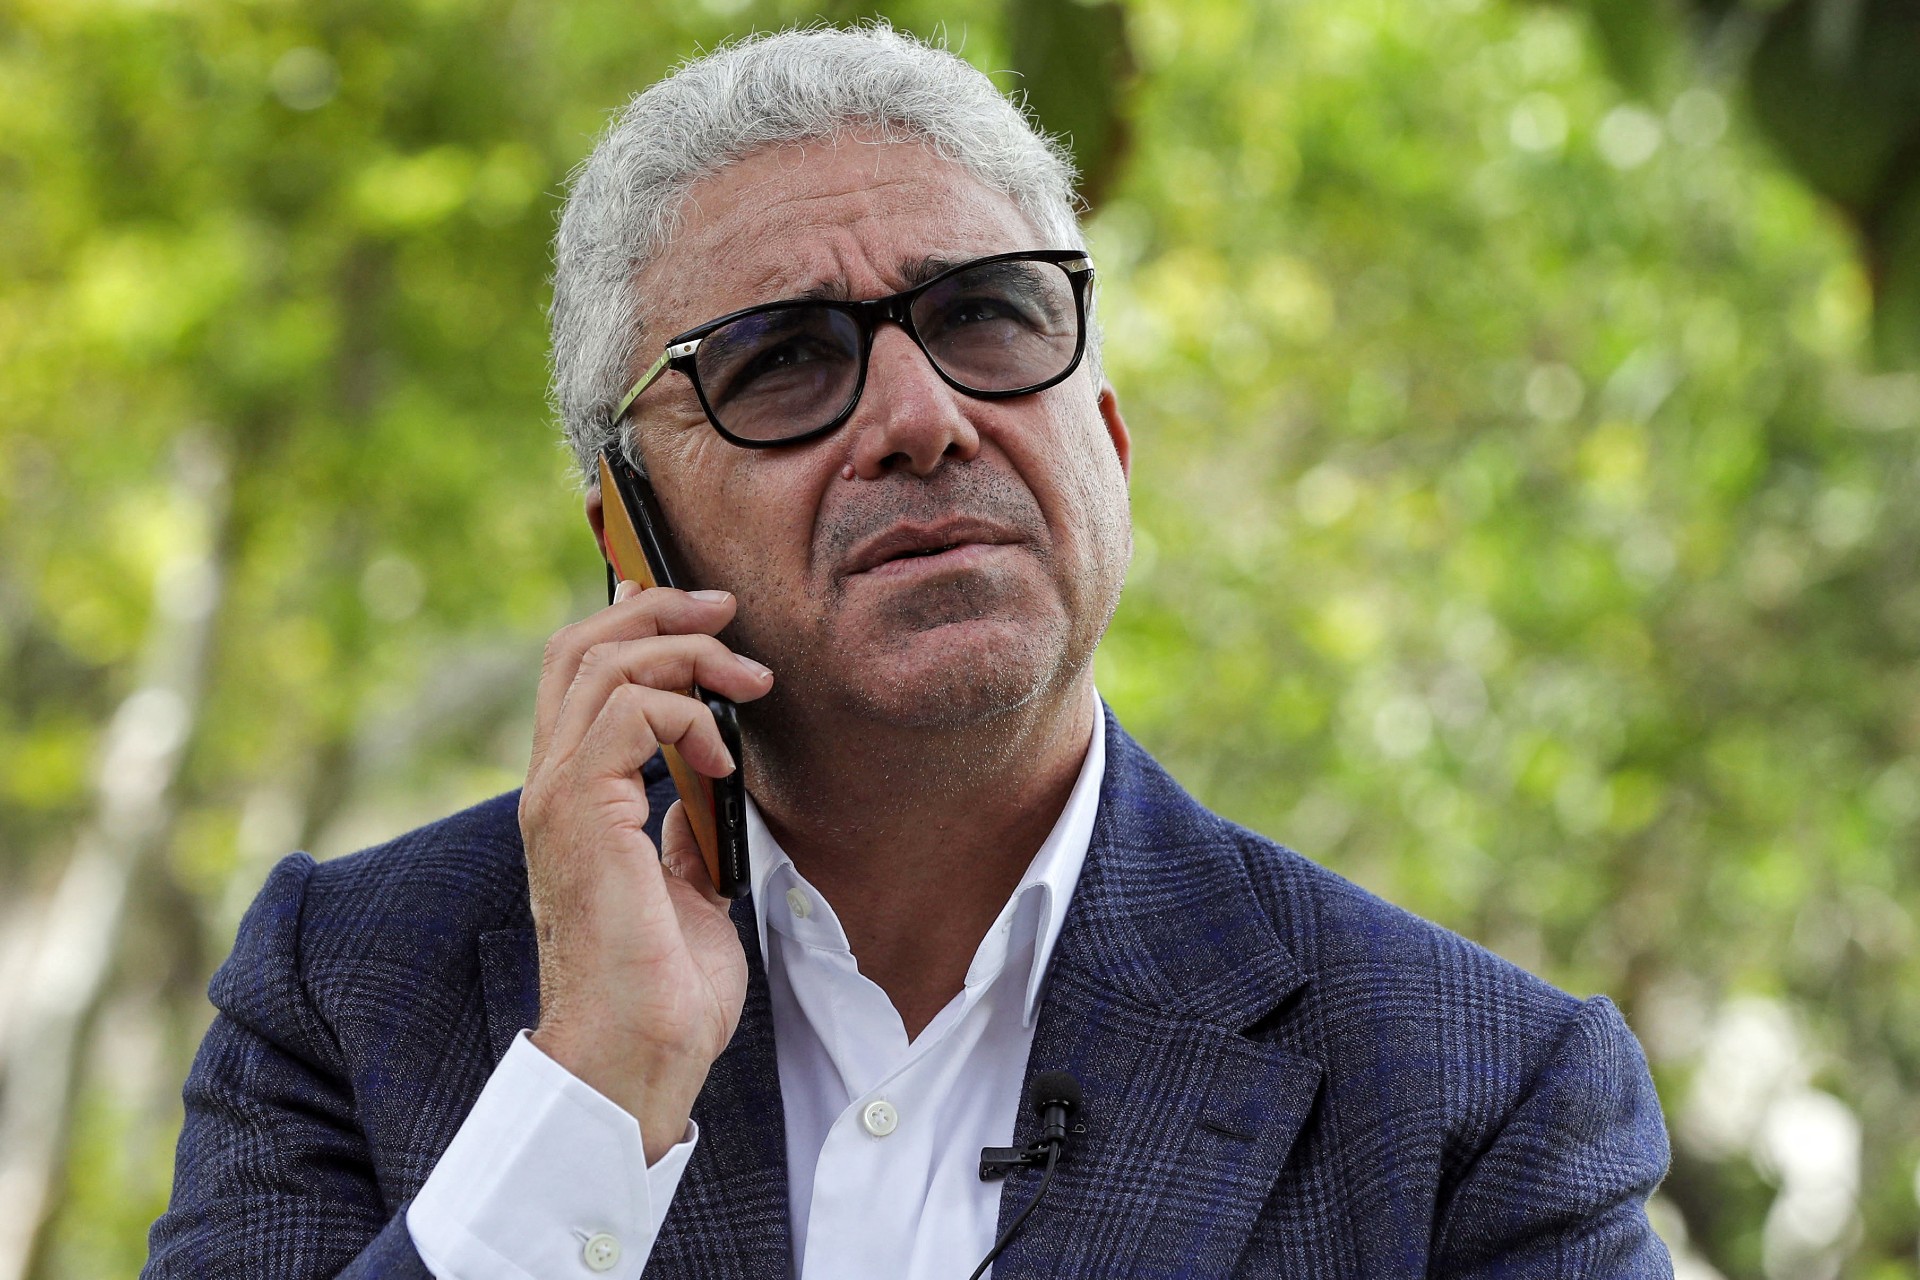 Fathi Bashagha, Libya's former interior minister, speaks on the phone during an interview with AFP in the capital Tripoli on October 6, 2021 (AFP)